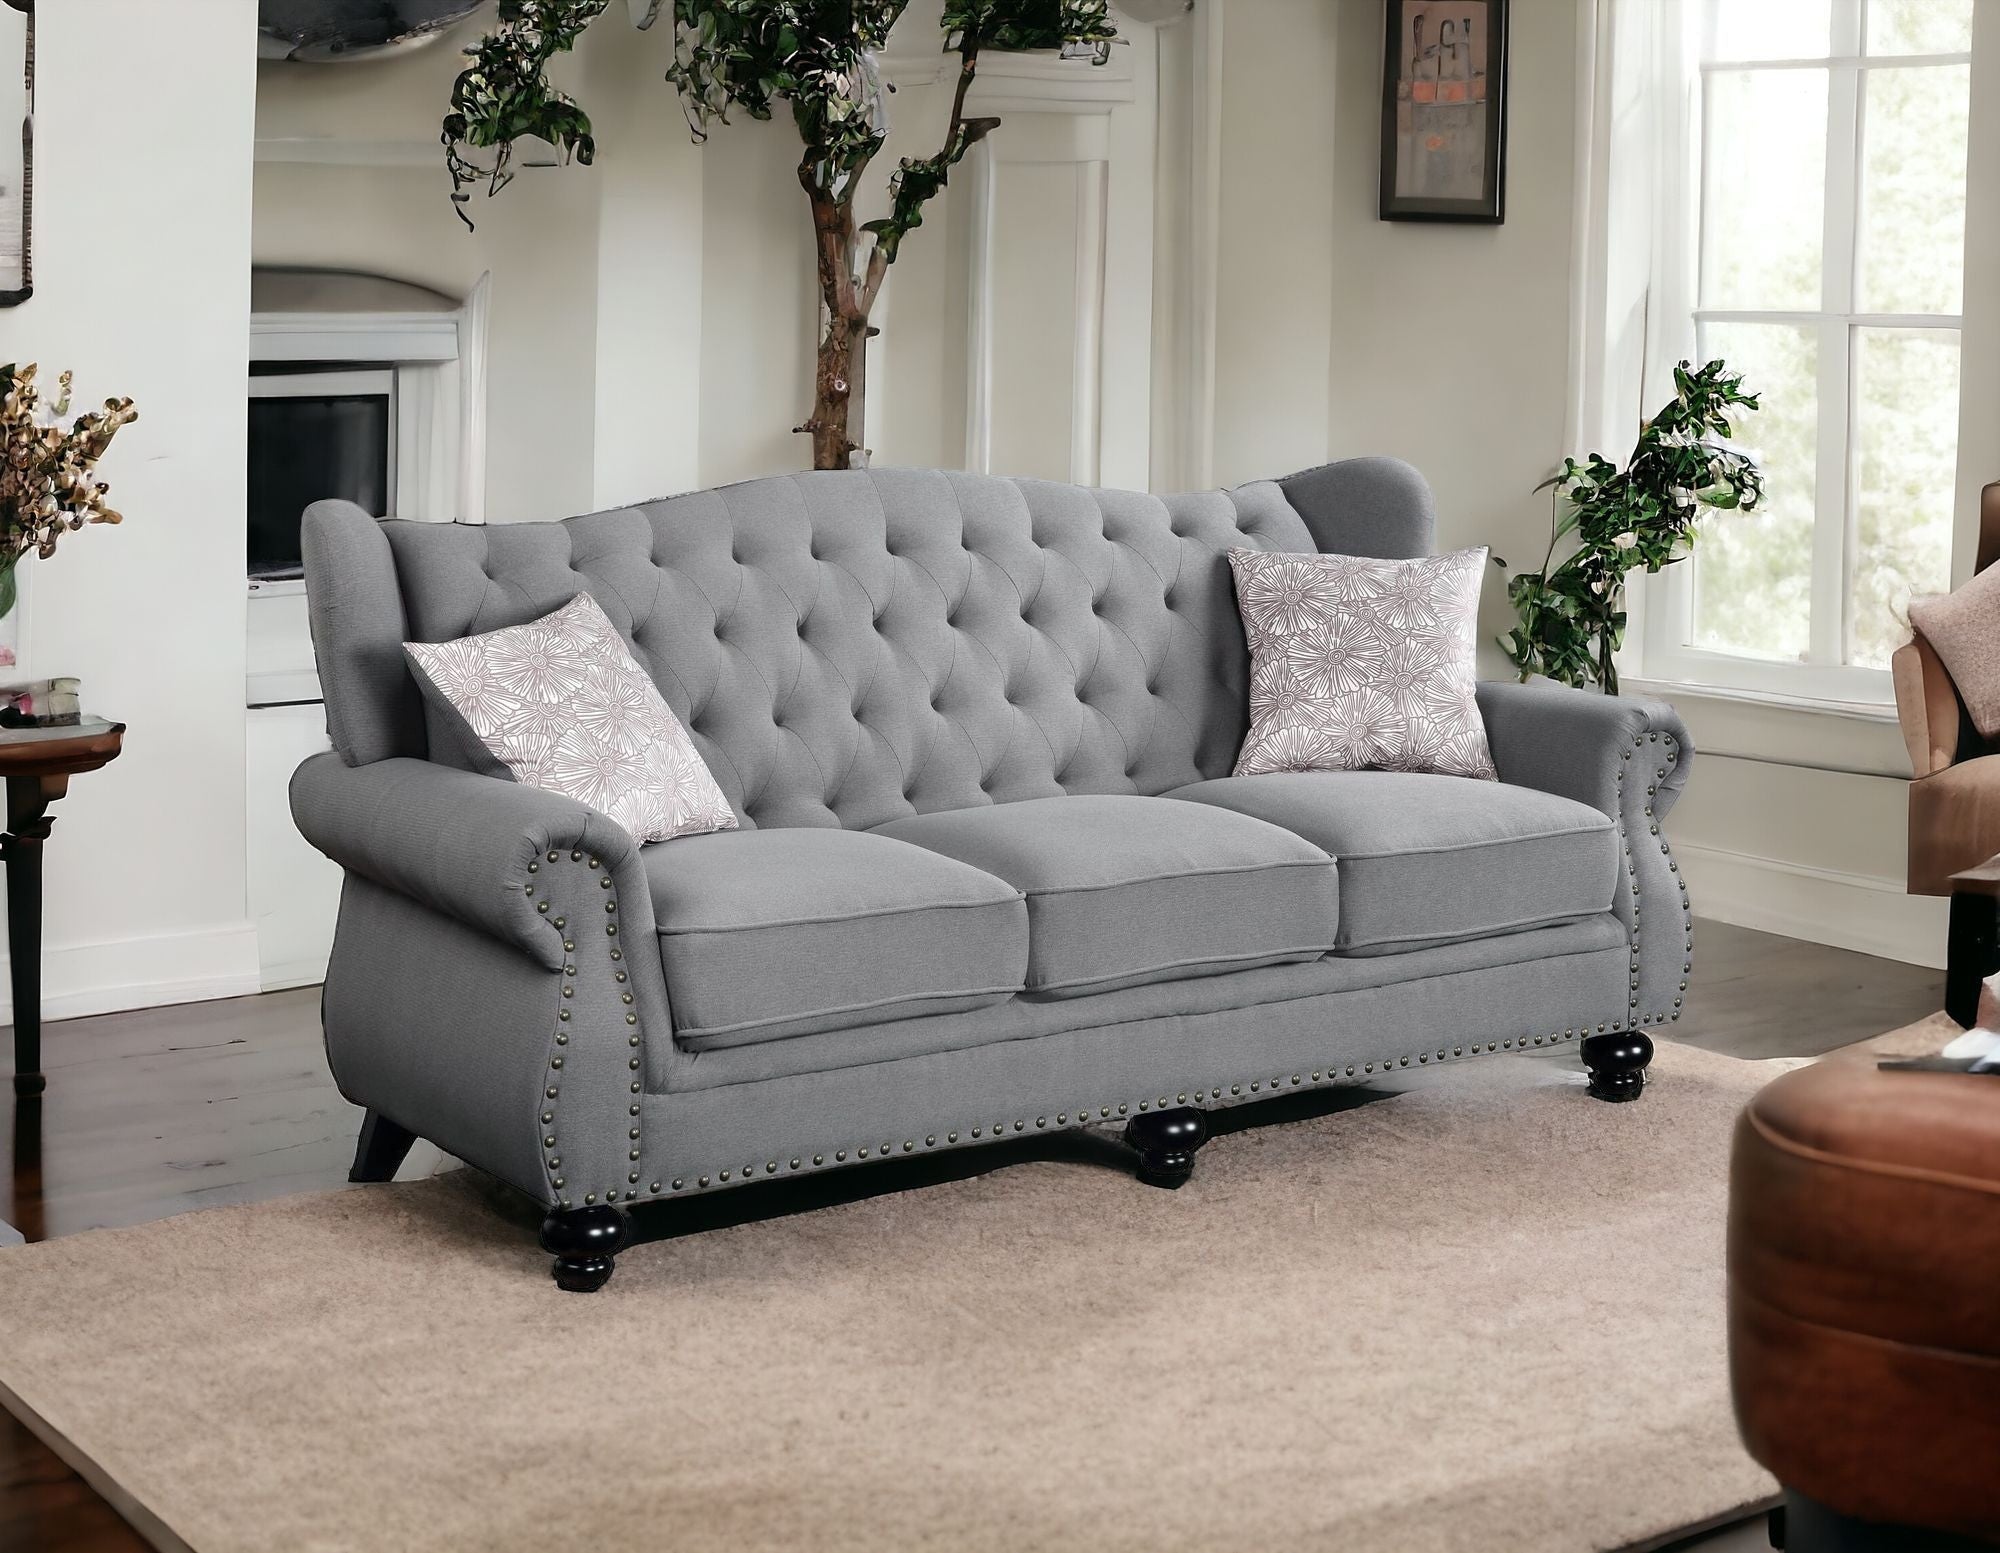 86" Gray And Black Sofa With Two Toss Pillows